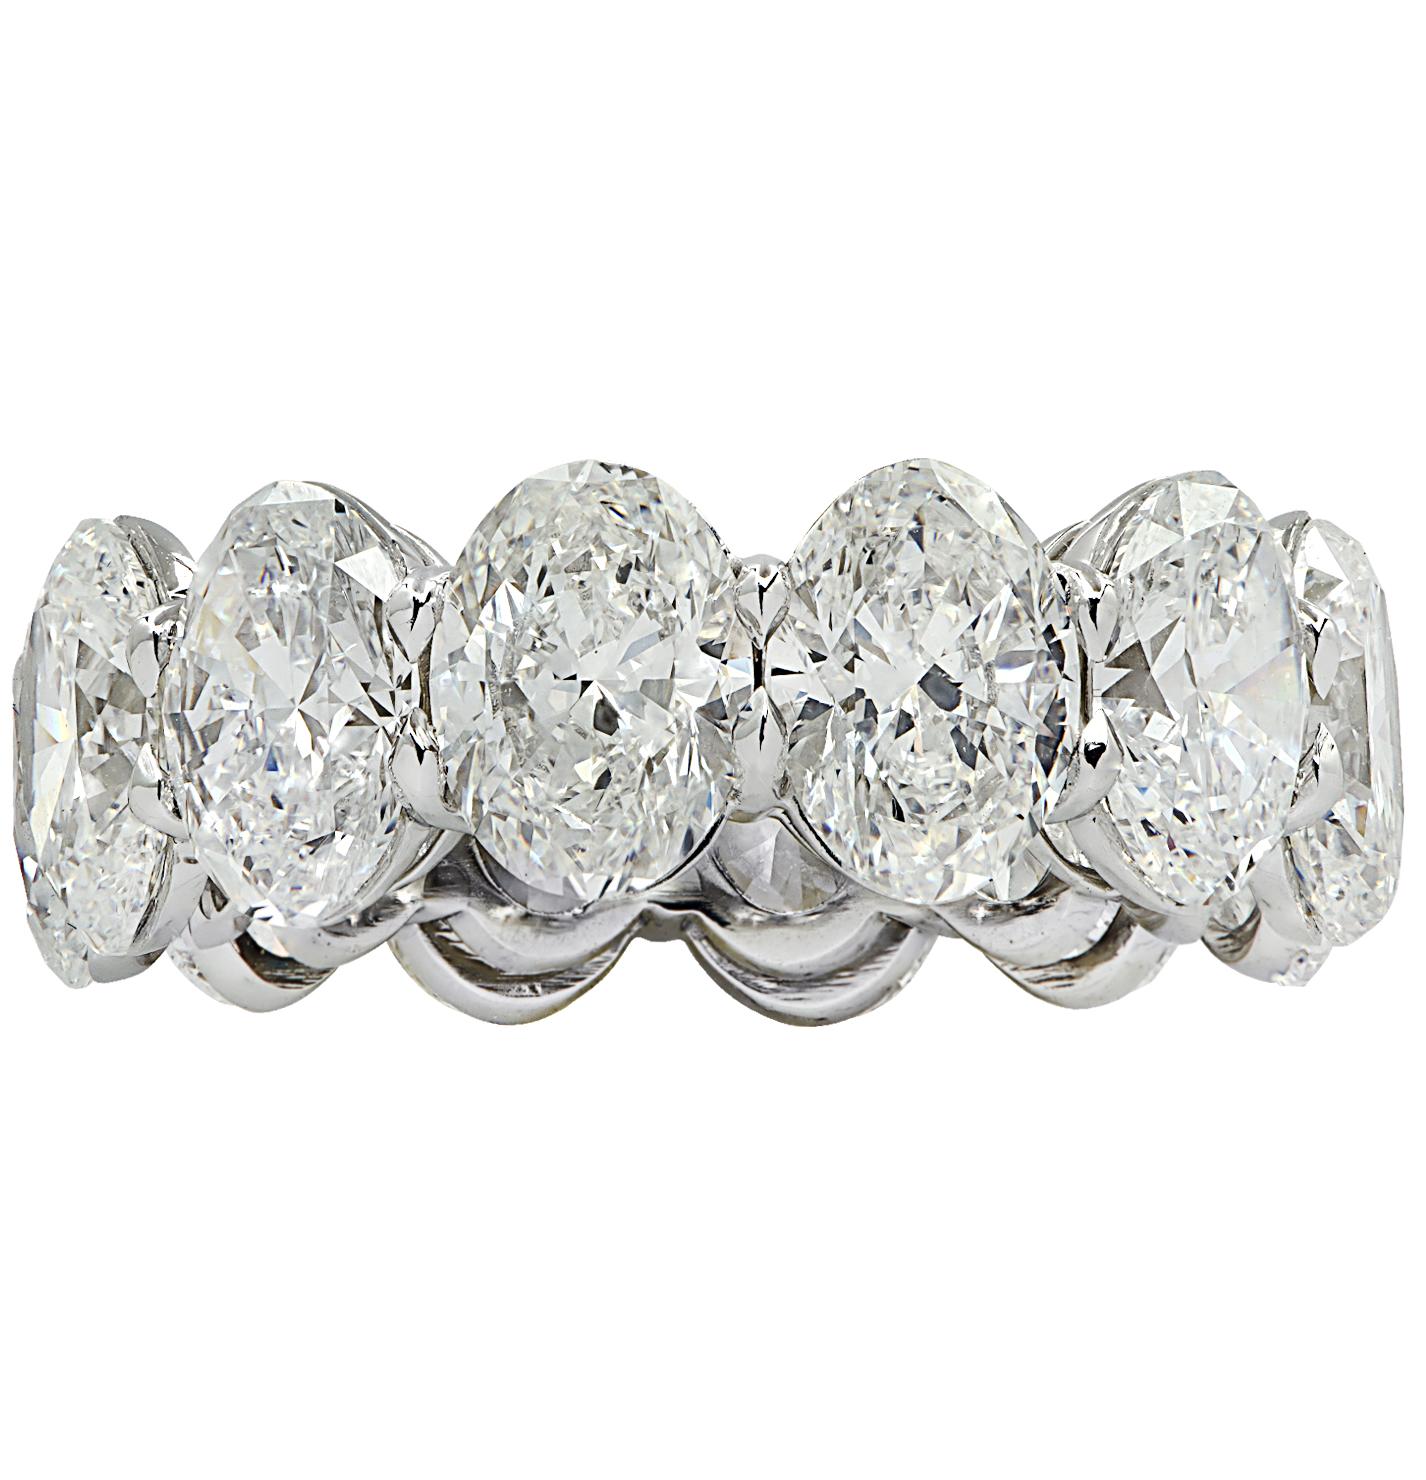 Exquisite Vivid Diamonds eternity band hand crafted in Platinum, showcasing 12 stunning GIA Certified oval diamonds weighing 12.10 carats total, D-F color, VVS-VS clarity. Each diamond was carefully selected, perfectly matched and set in a seamless